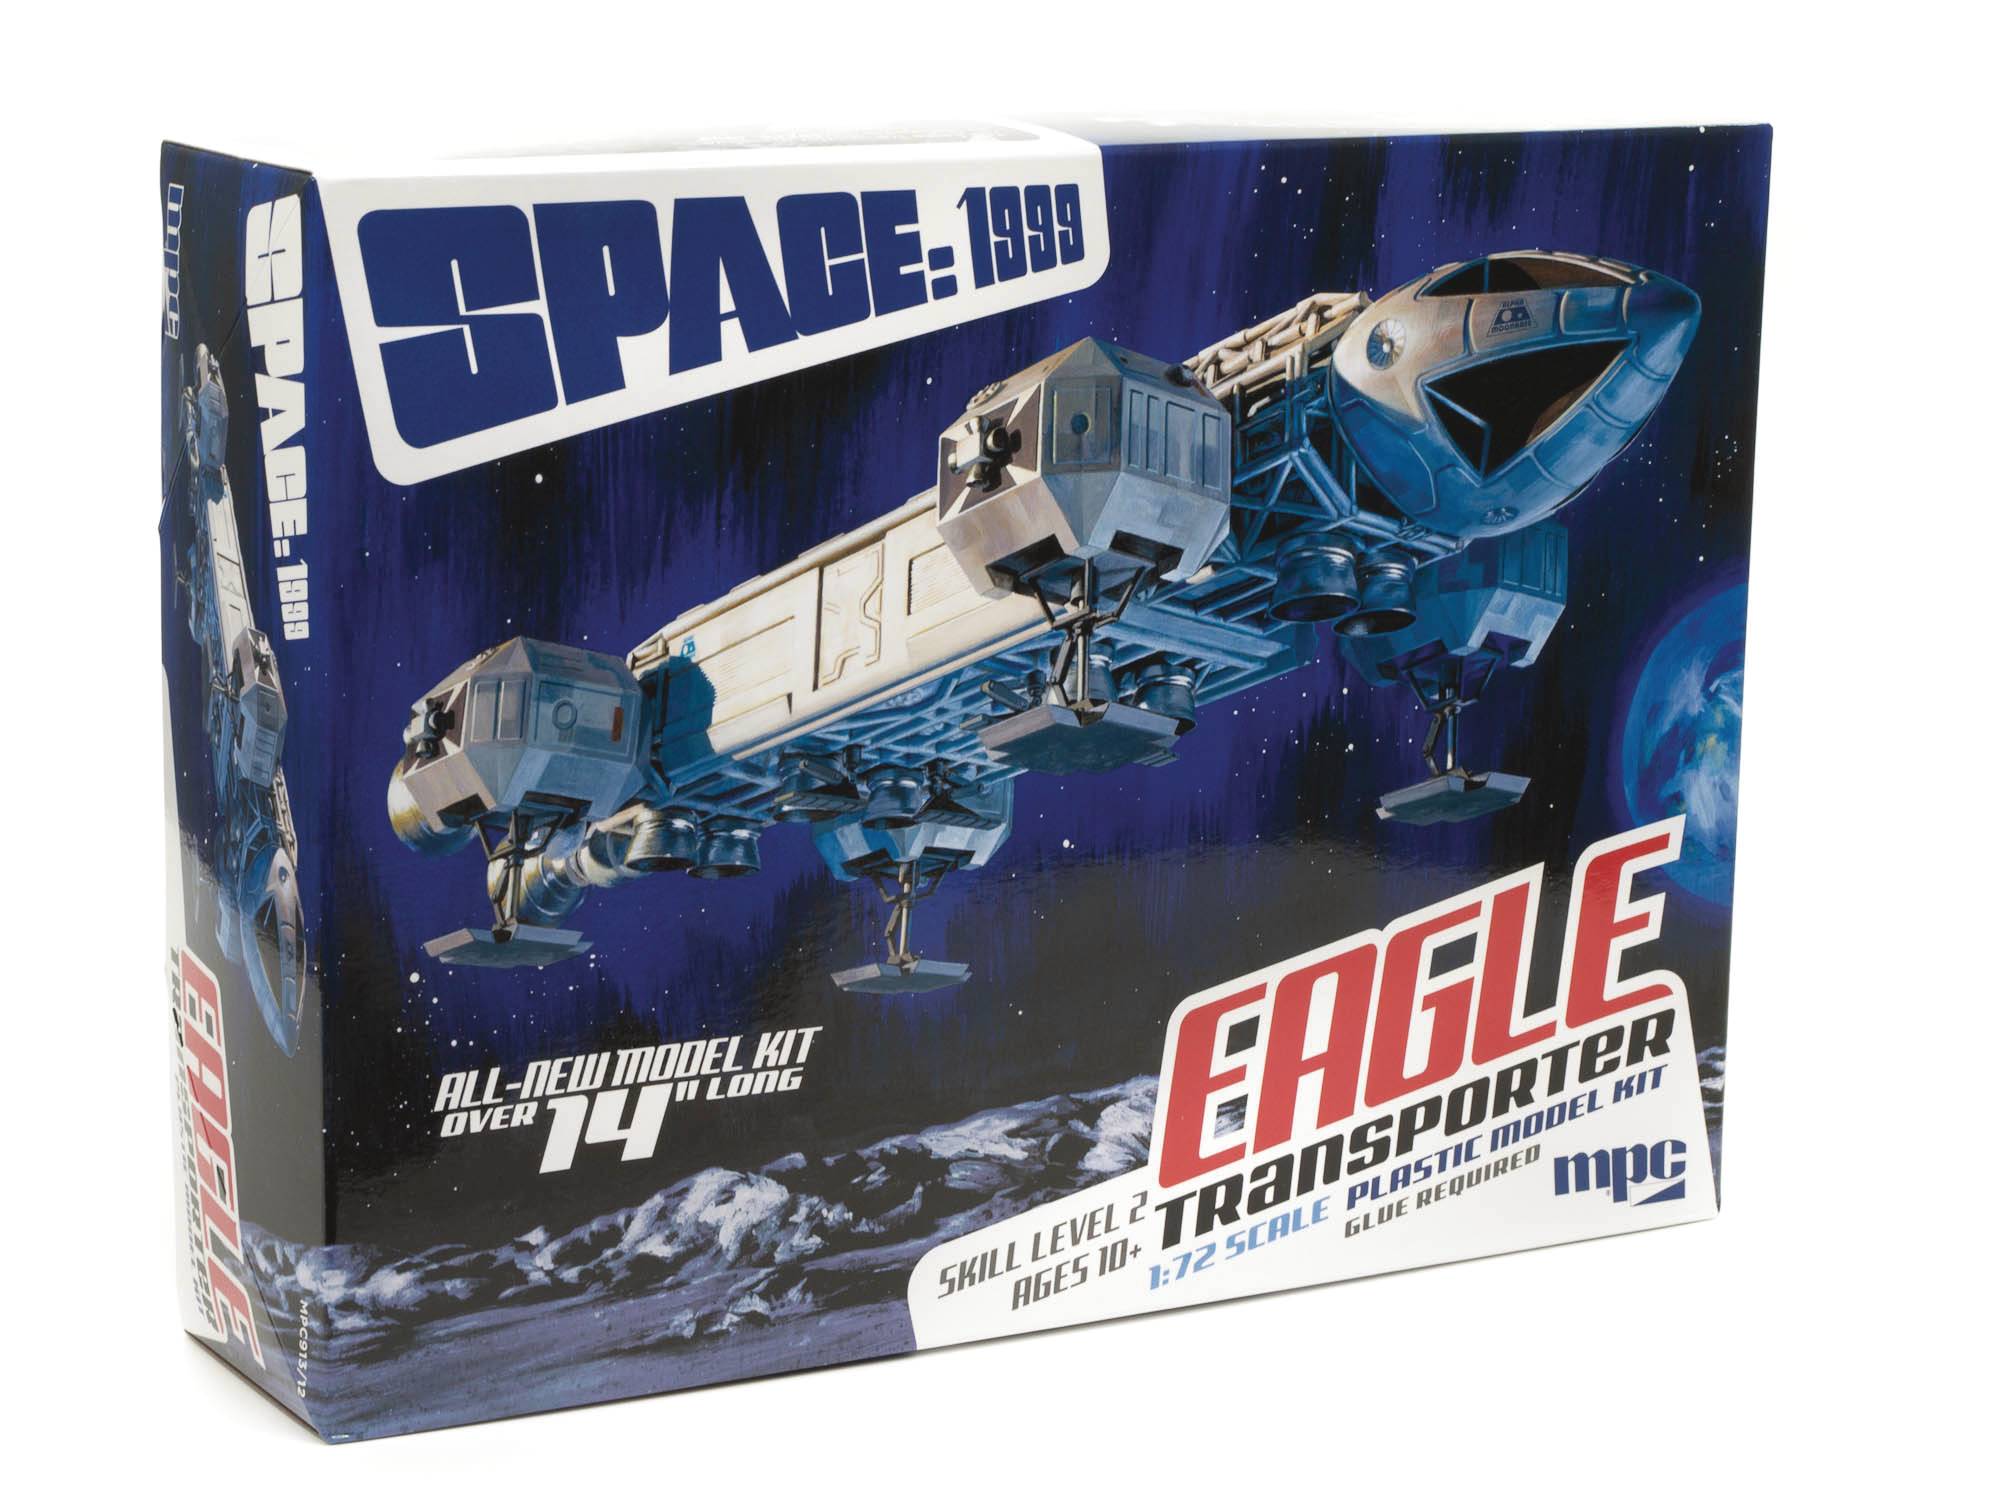 MPC SPACE 1999 EAGLE TRANSPORTER 1/72 SCALE MODEL KIT